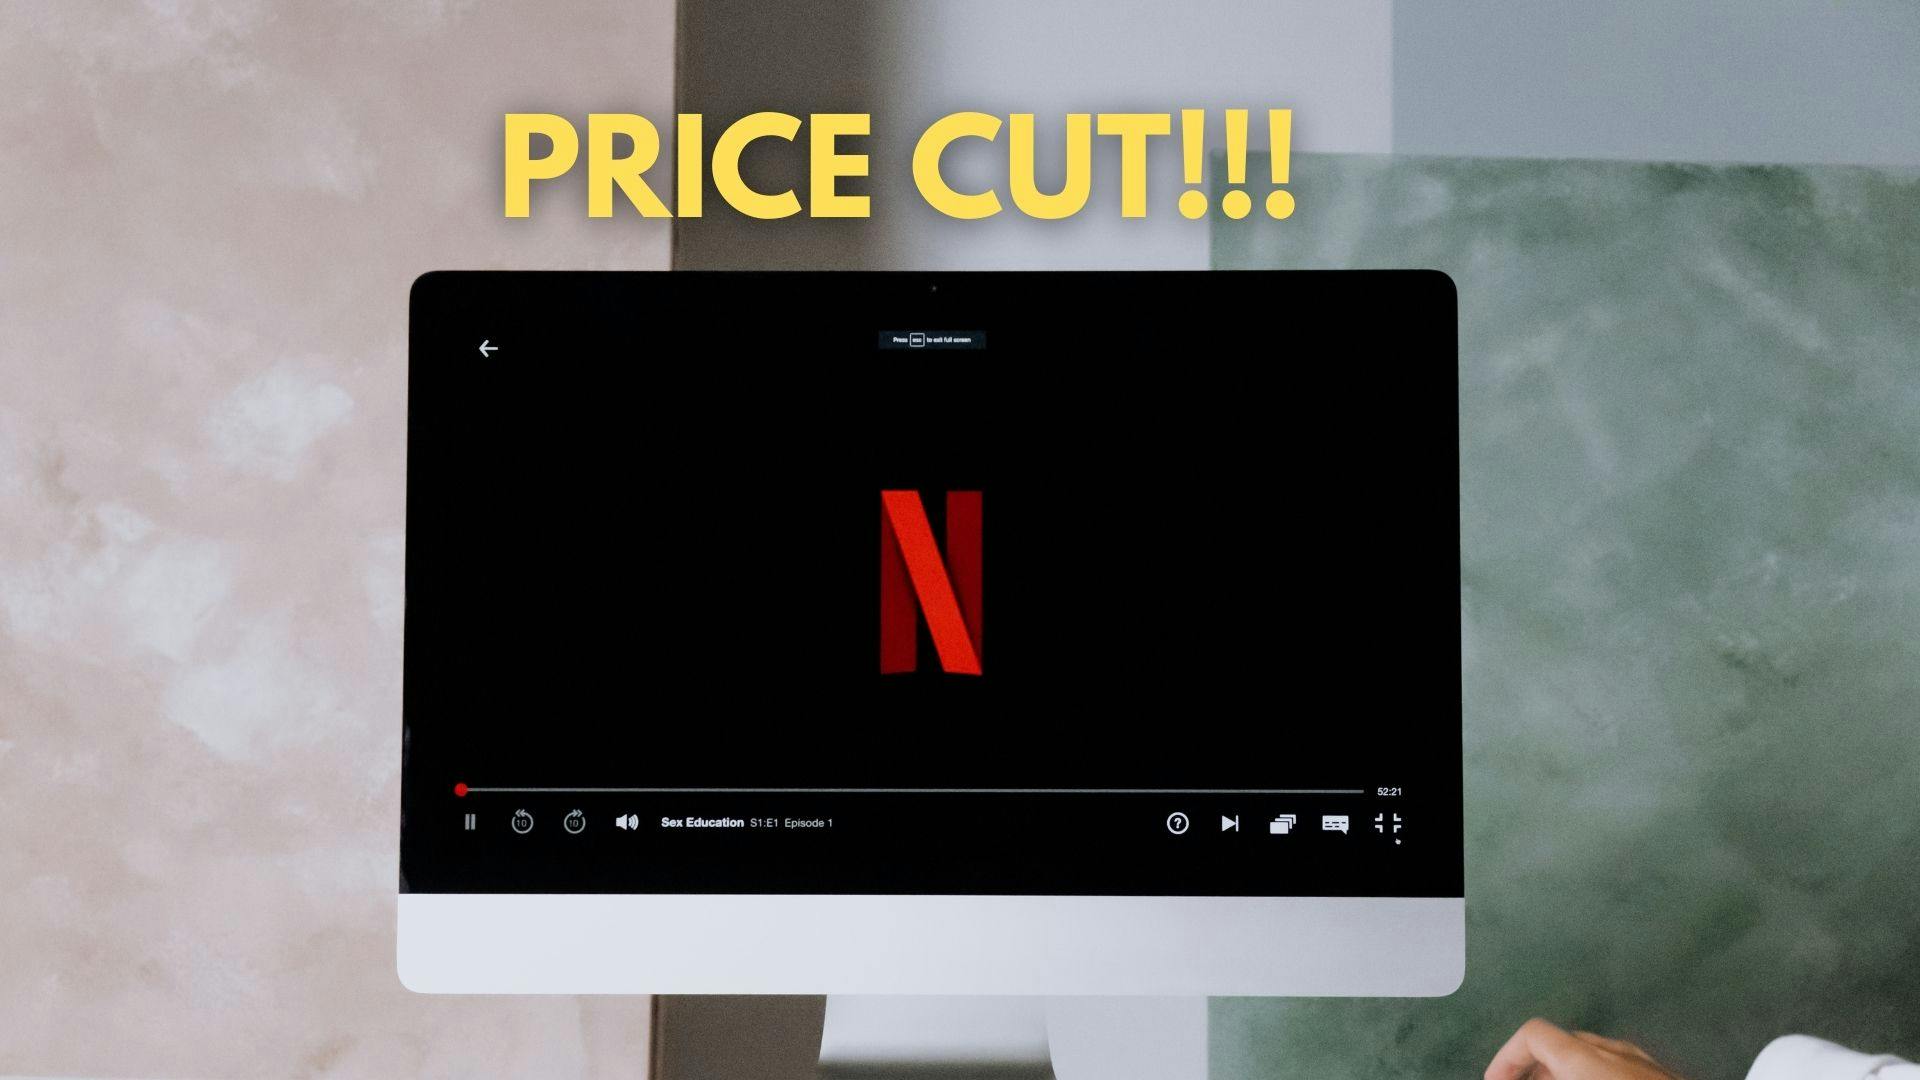 Netflix plans prices in India is reduced around 18% to 60%, here are the new Plans